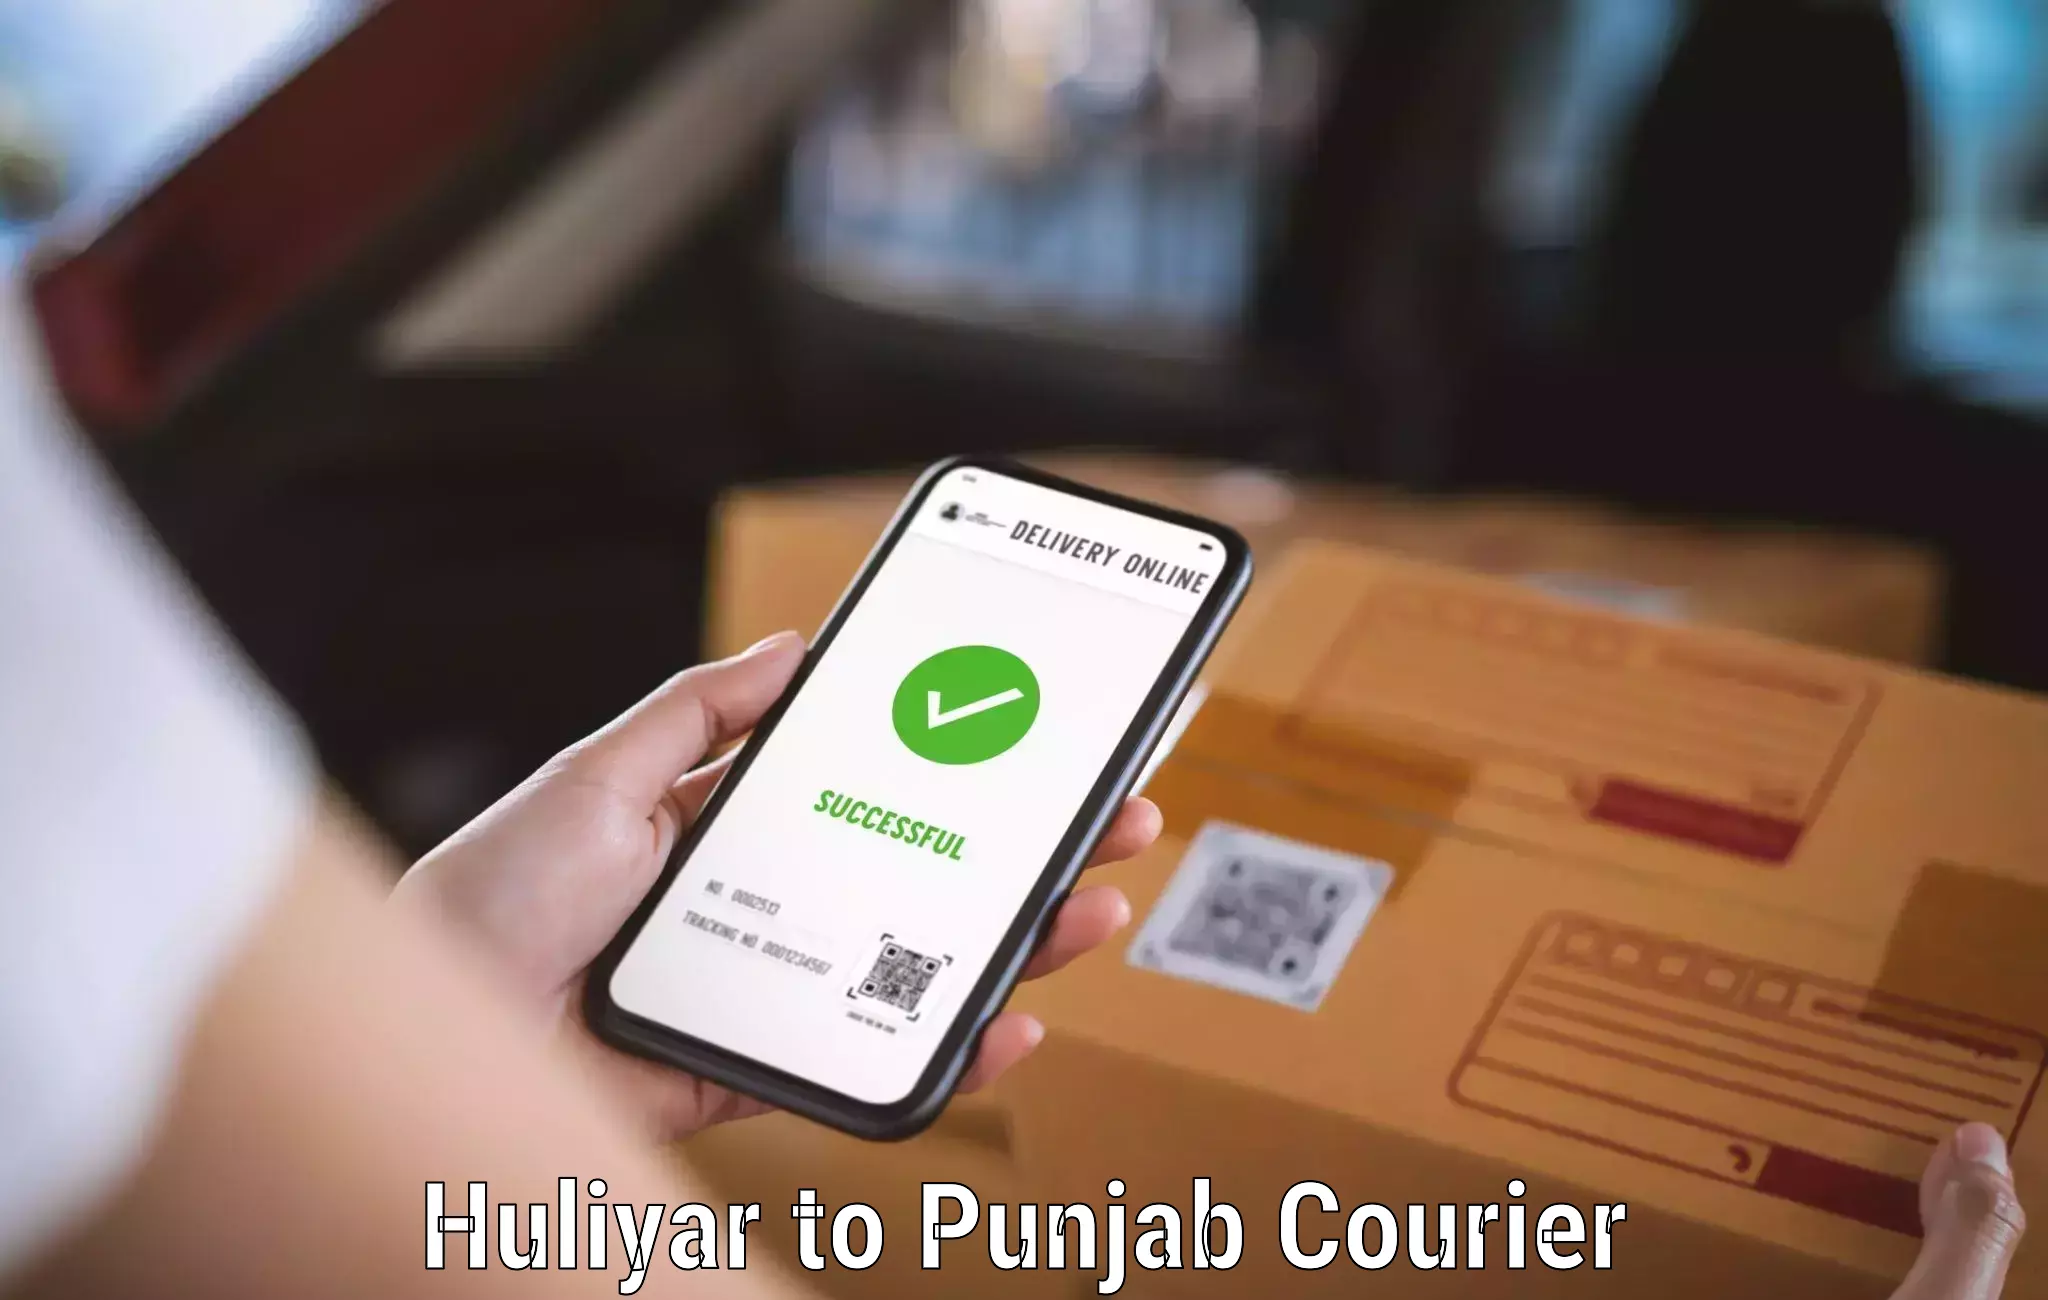 Comprehensive delivery network Huliyar to Mohali